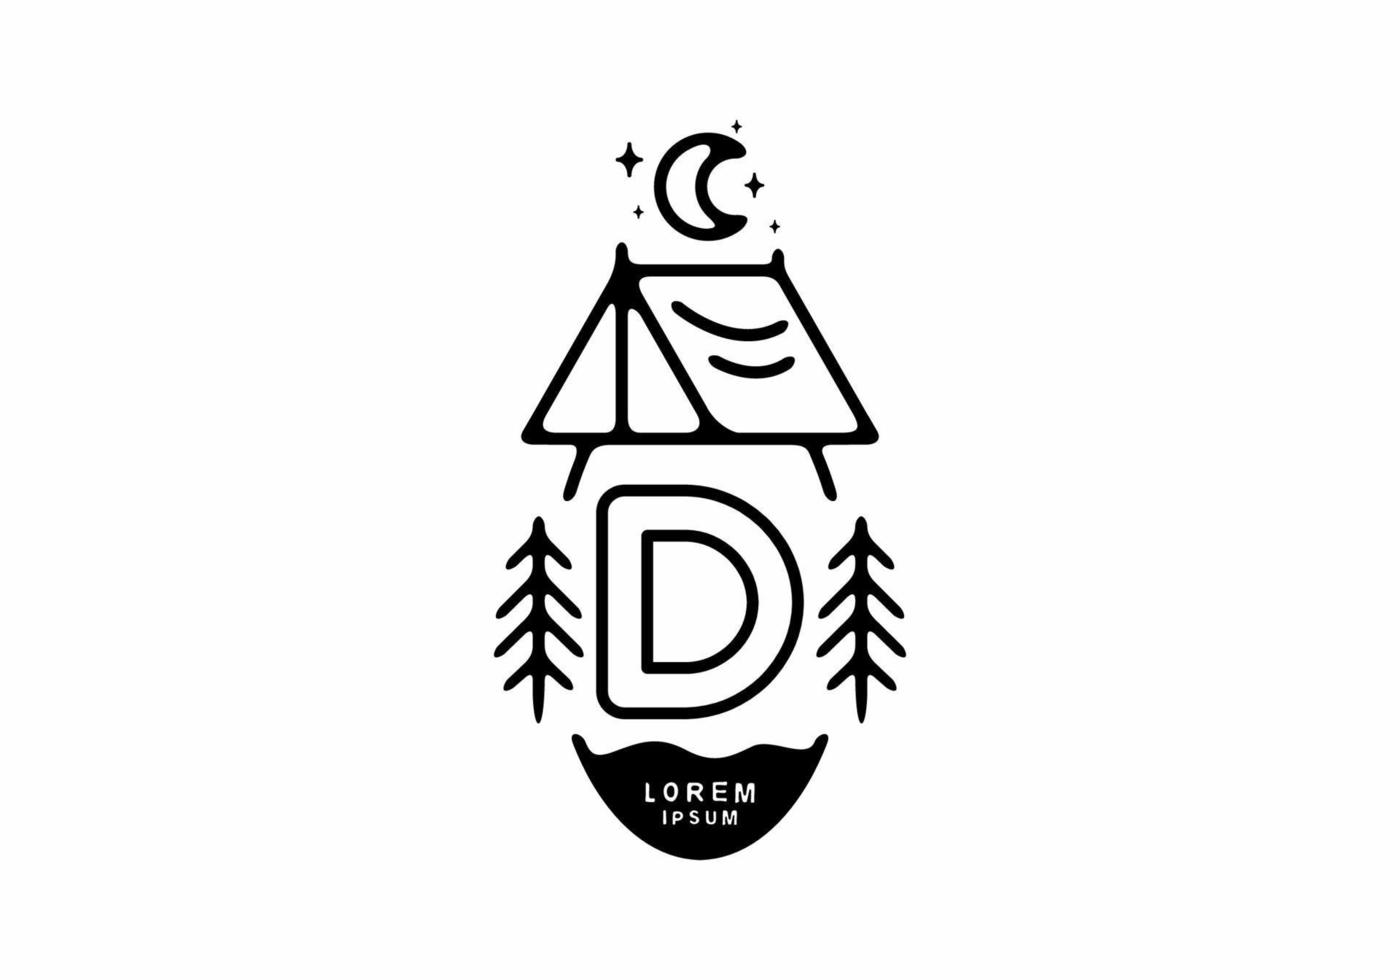 Black line art illustration of camping tent badge with D letter vector